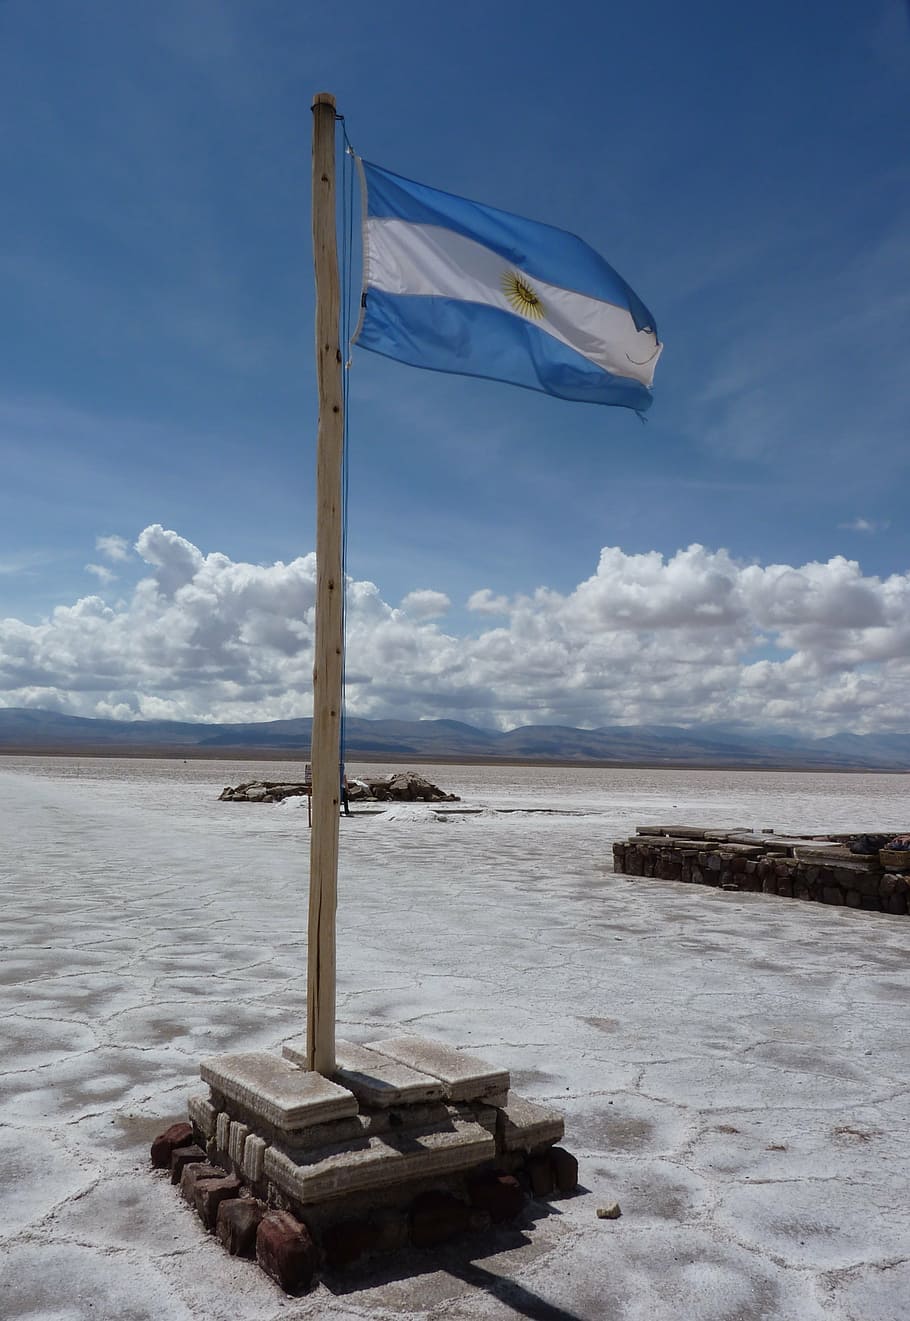 argentine, flag, salt lake, landscape, scenery, natural, outdoor, environment, view, scenic